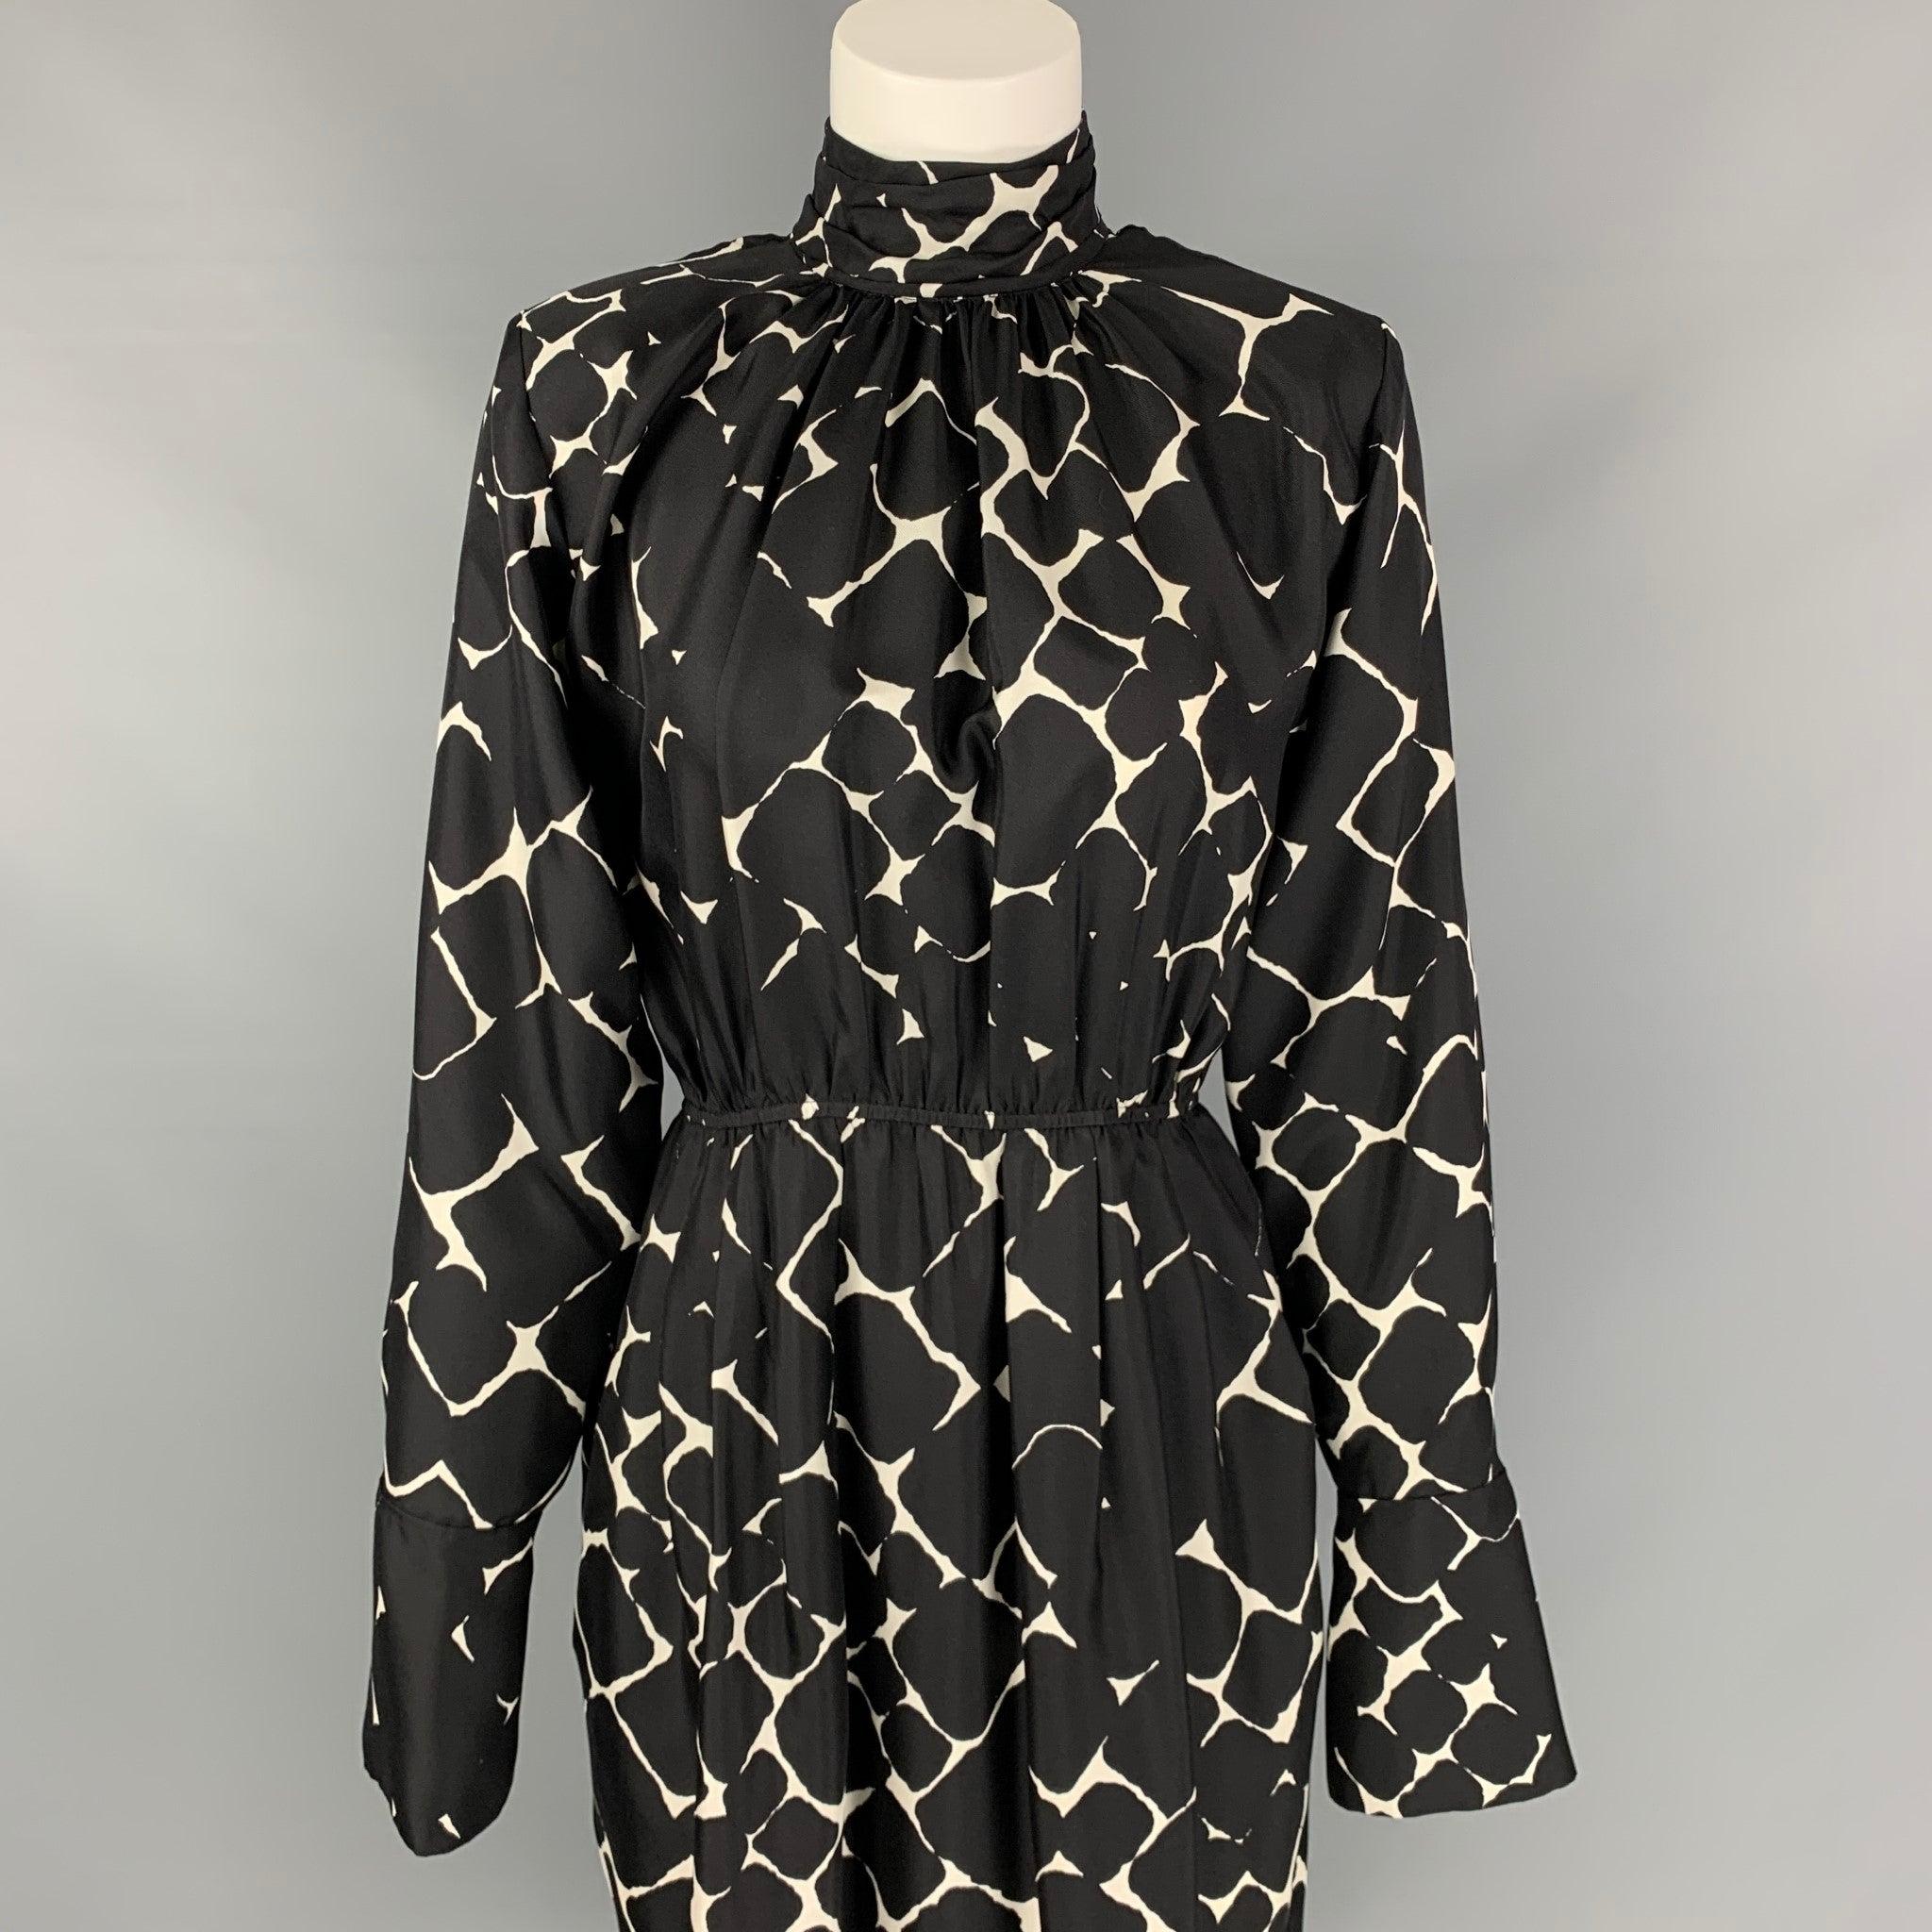 MARC JACOBS dress comes in a black & white print silk featuring a shift style, pleated, turtleneck, slit pockets, elastic waistband, and a back zip up closure.
Excellent
Pre-Owned Condition. 

Marked:   4 

Measurements: 
 
Shoulder: 15 inches 